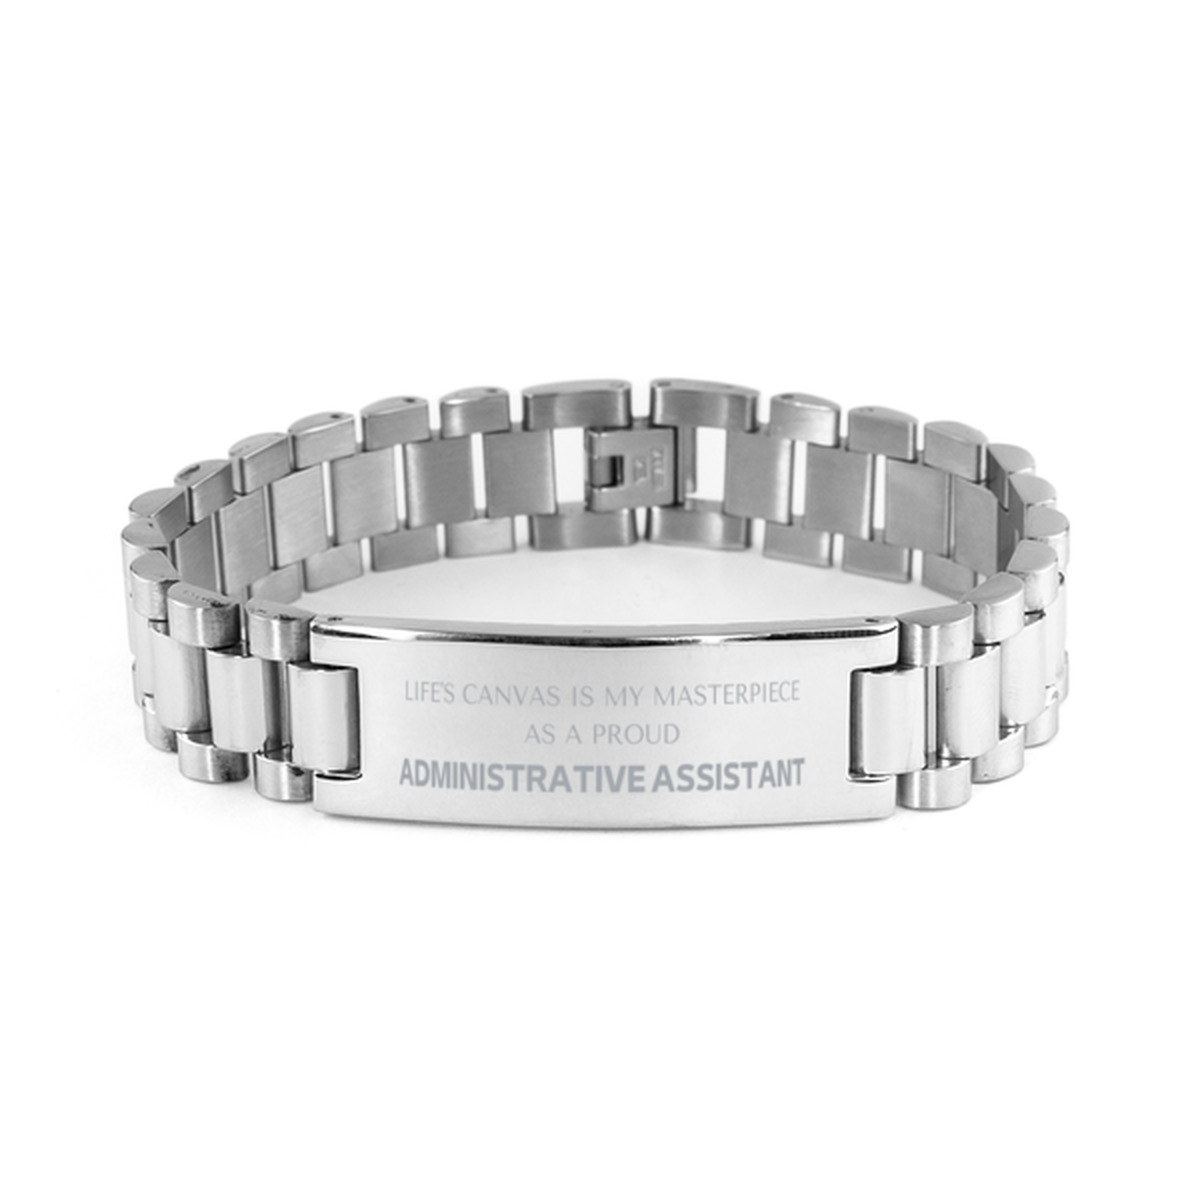 Proud Administrative Assistant Gifts, Life's canvas is my masterpiece, Epic Birthday Christmas Unique Ladder Stainless Steel Bracelet For Administrative Assistant, Coworkers, Men, Women, Friends